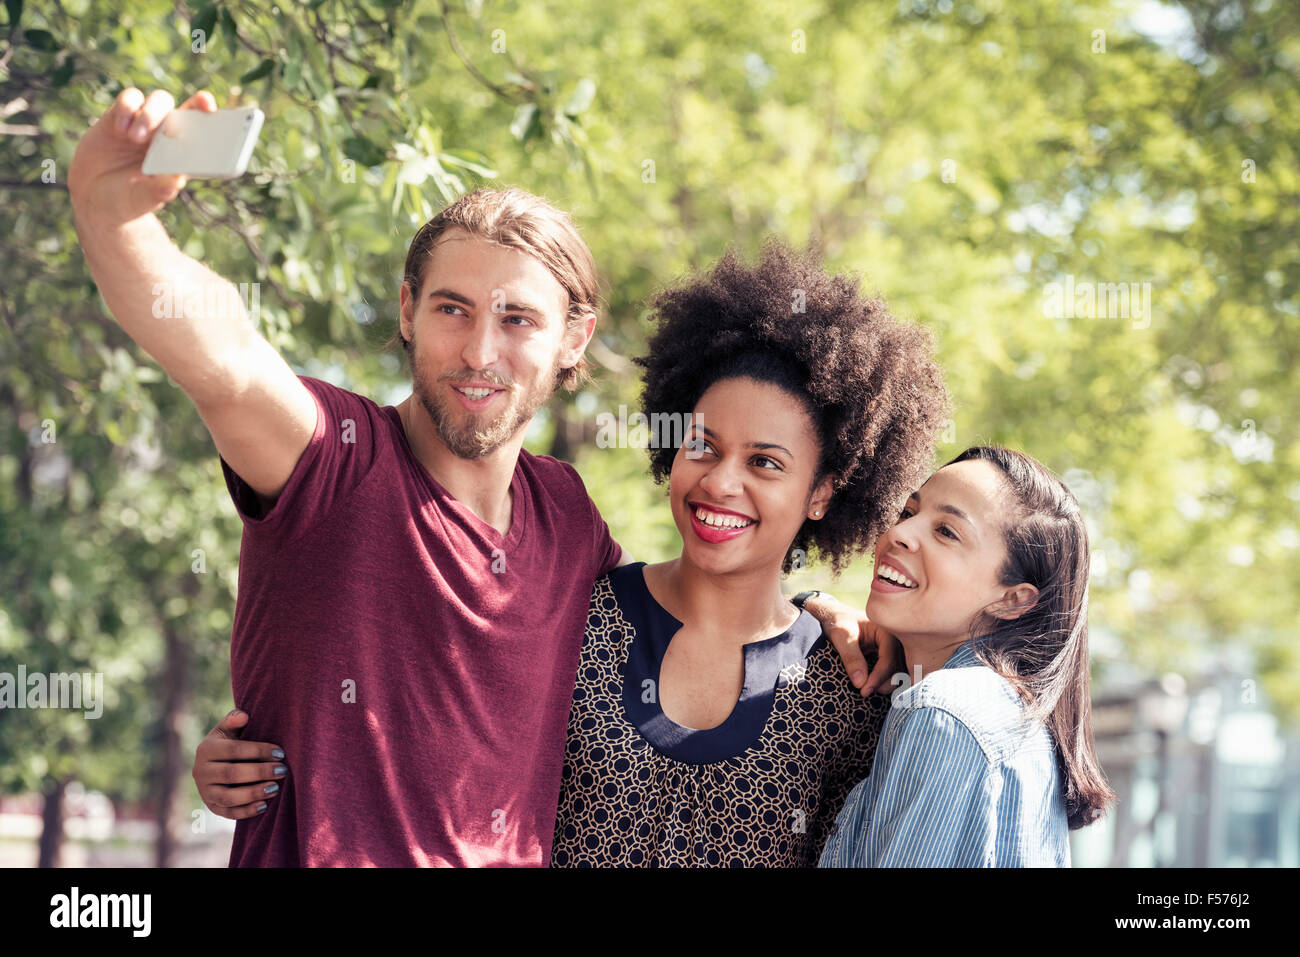 Three people, a man and two women, taking selfies in a city park Stock Photo